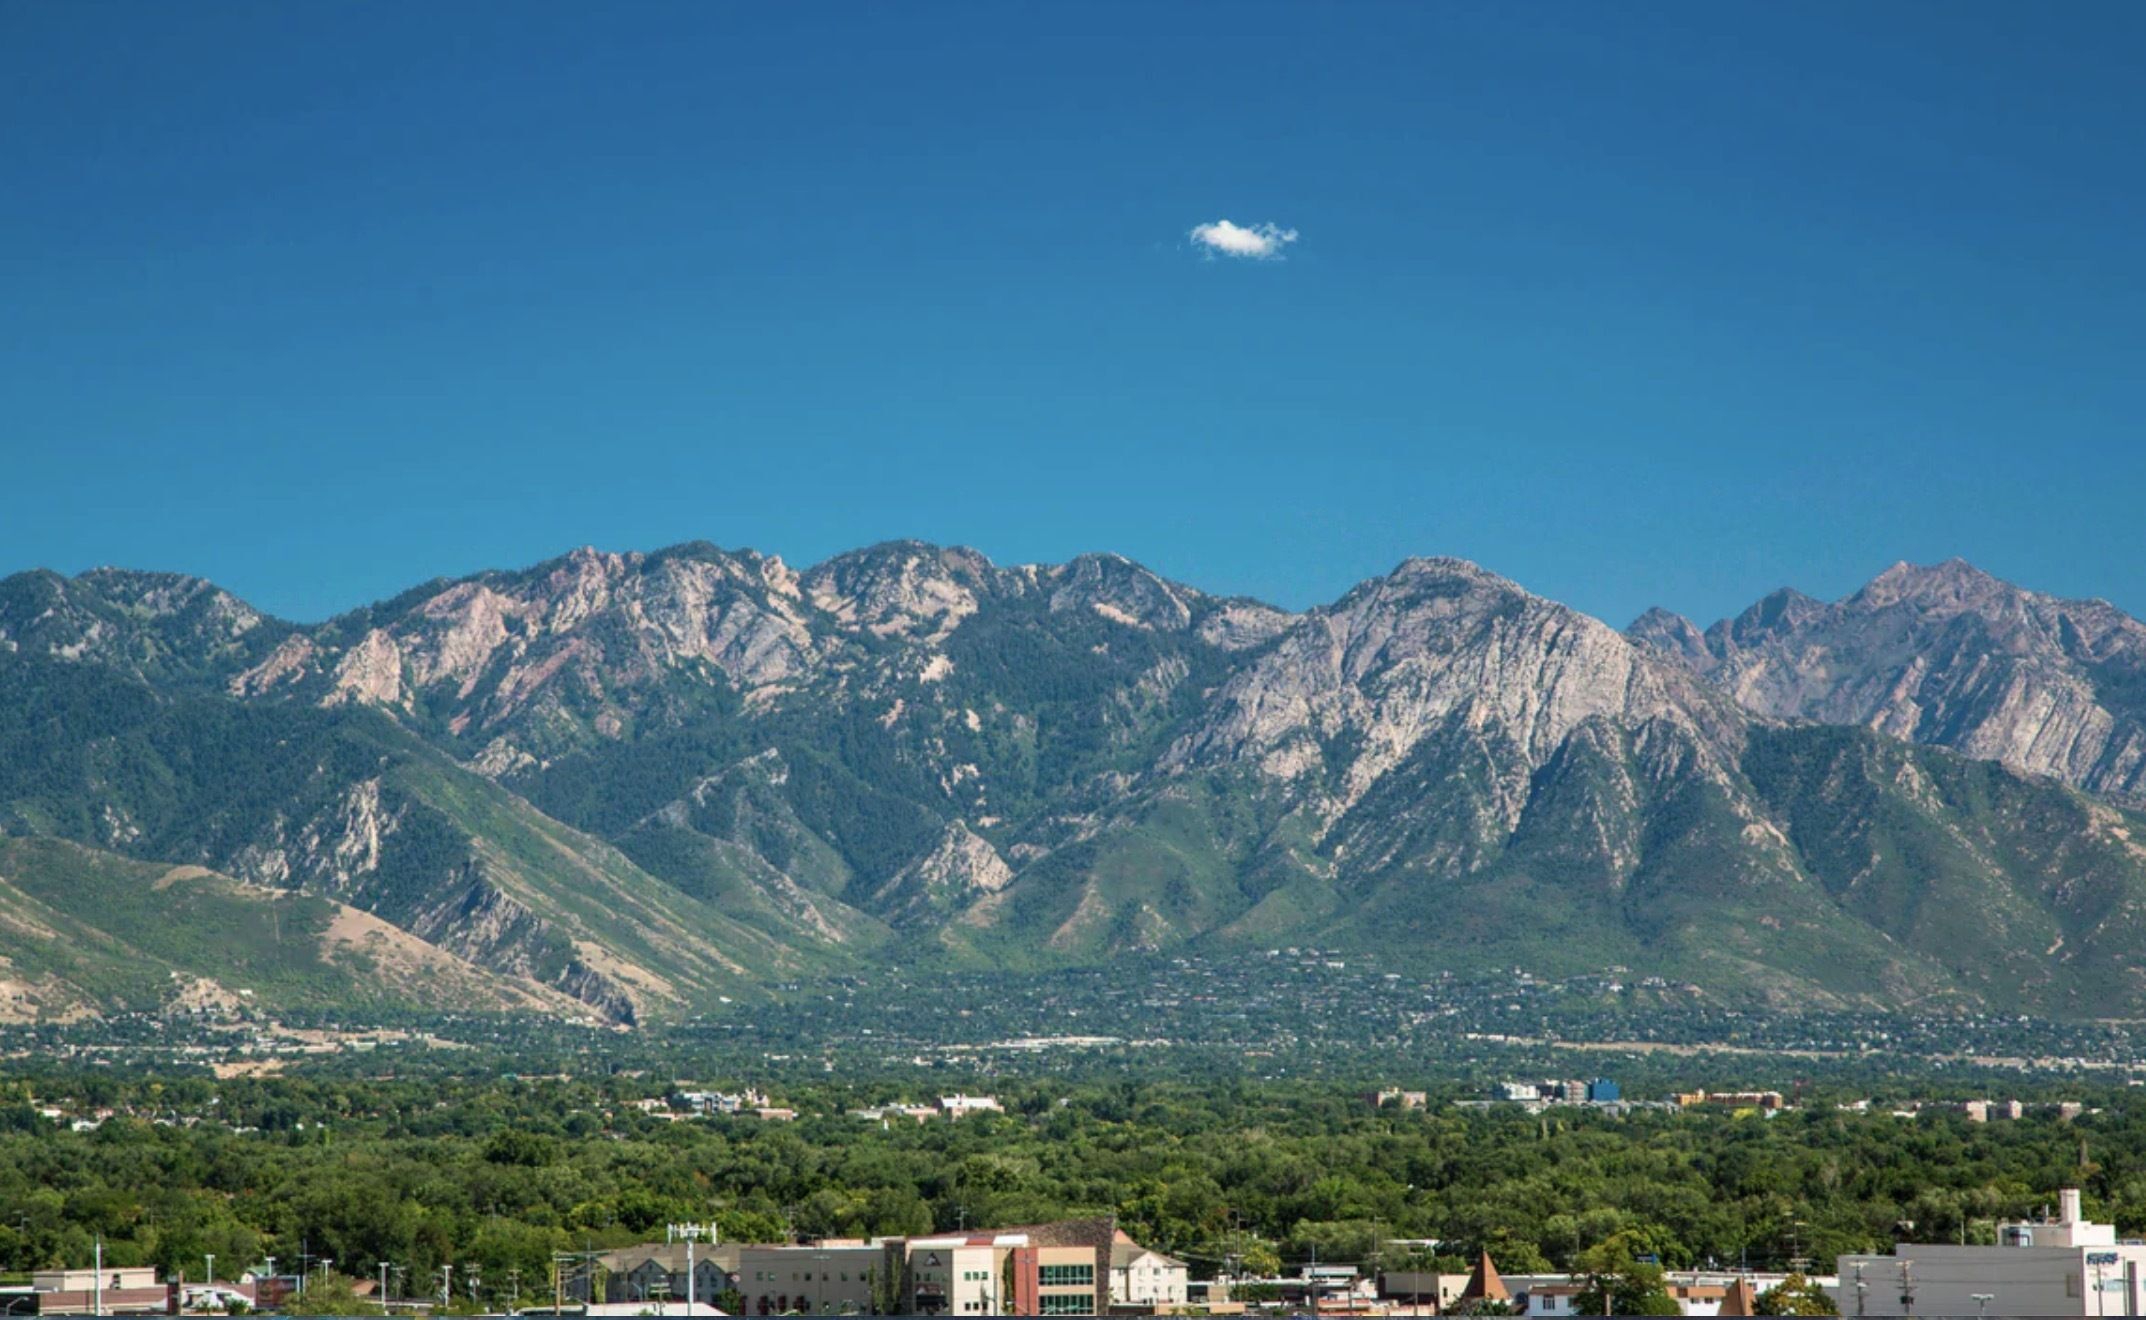 View of the mountains from Salt Lake City